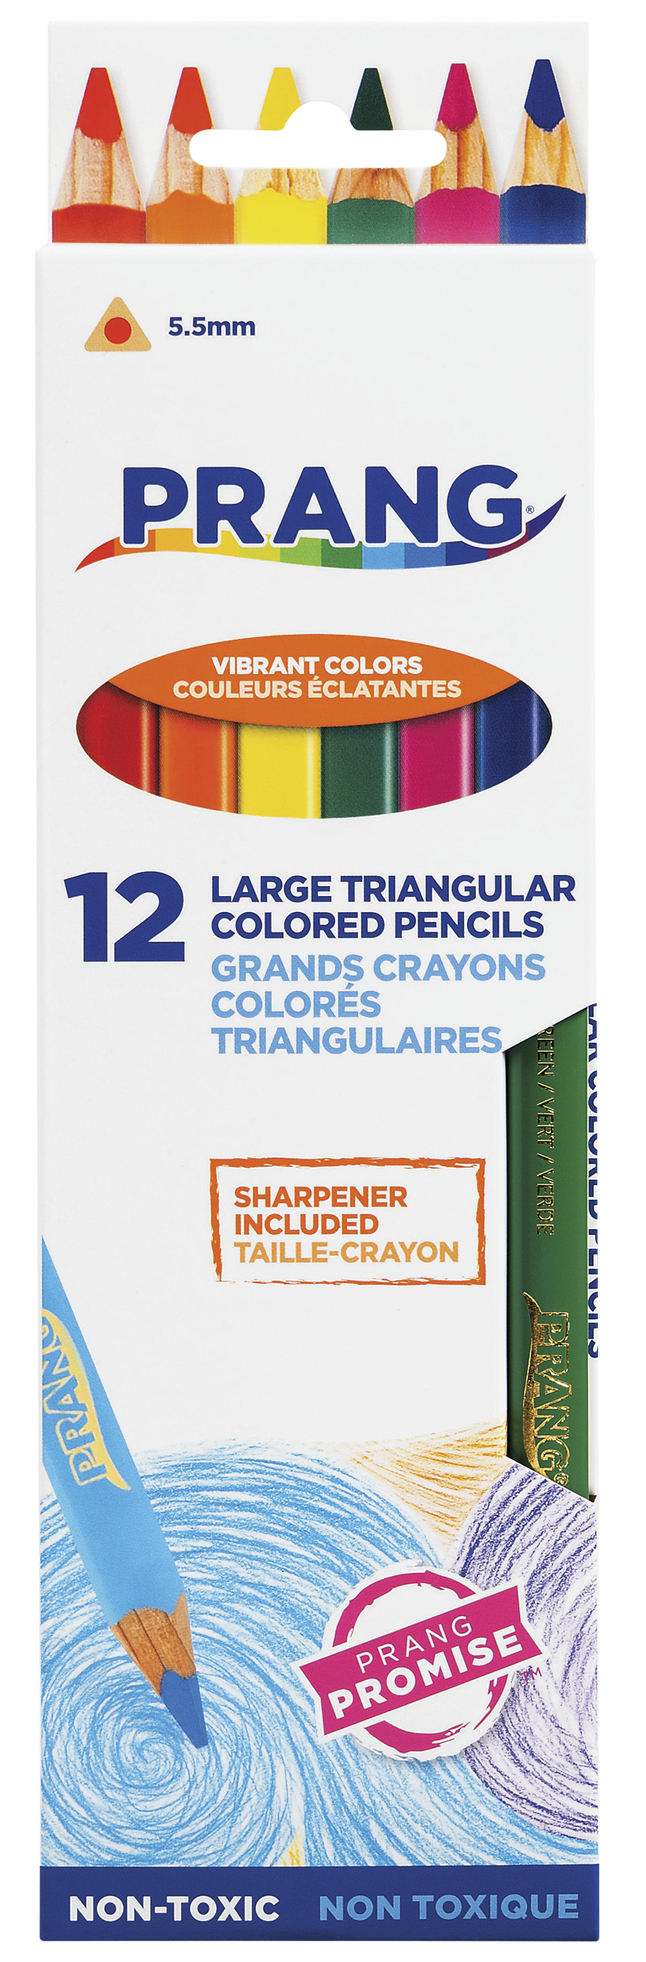 Prang Large Triangular Colored Pencils, Assorted, Set of 12